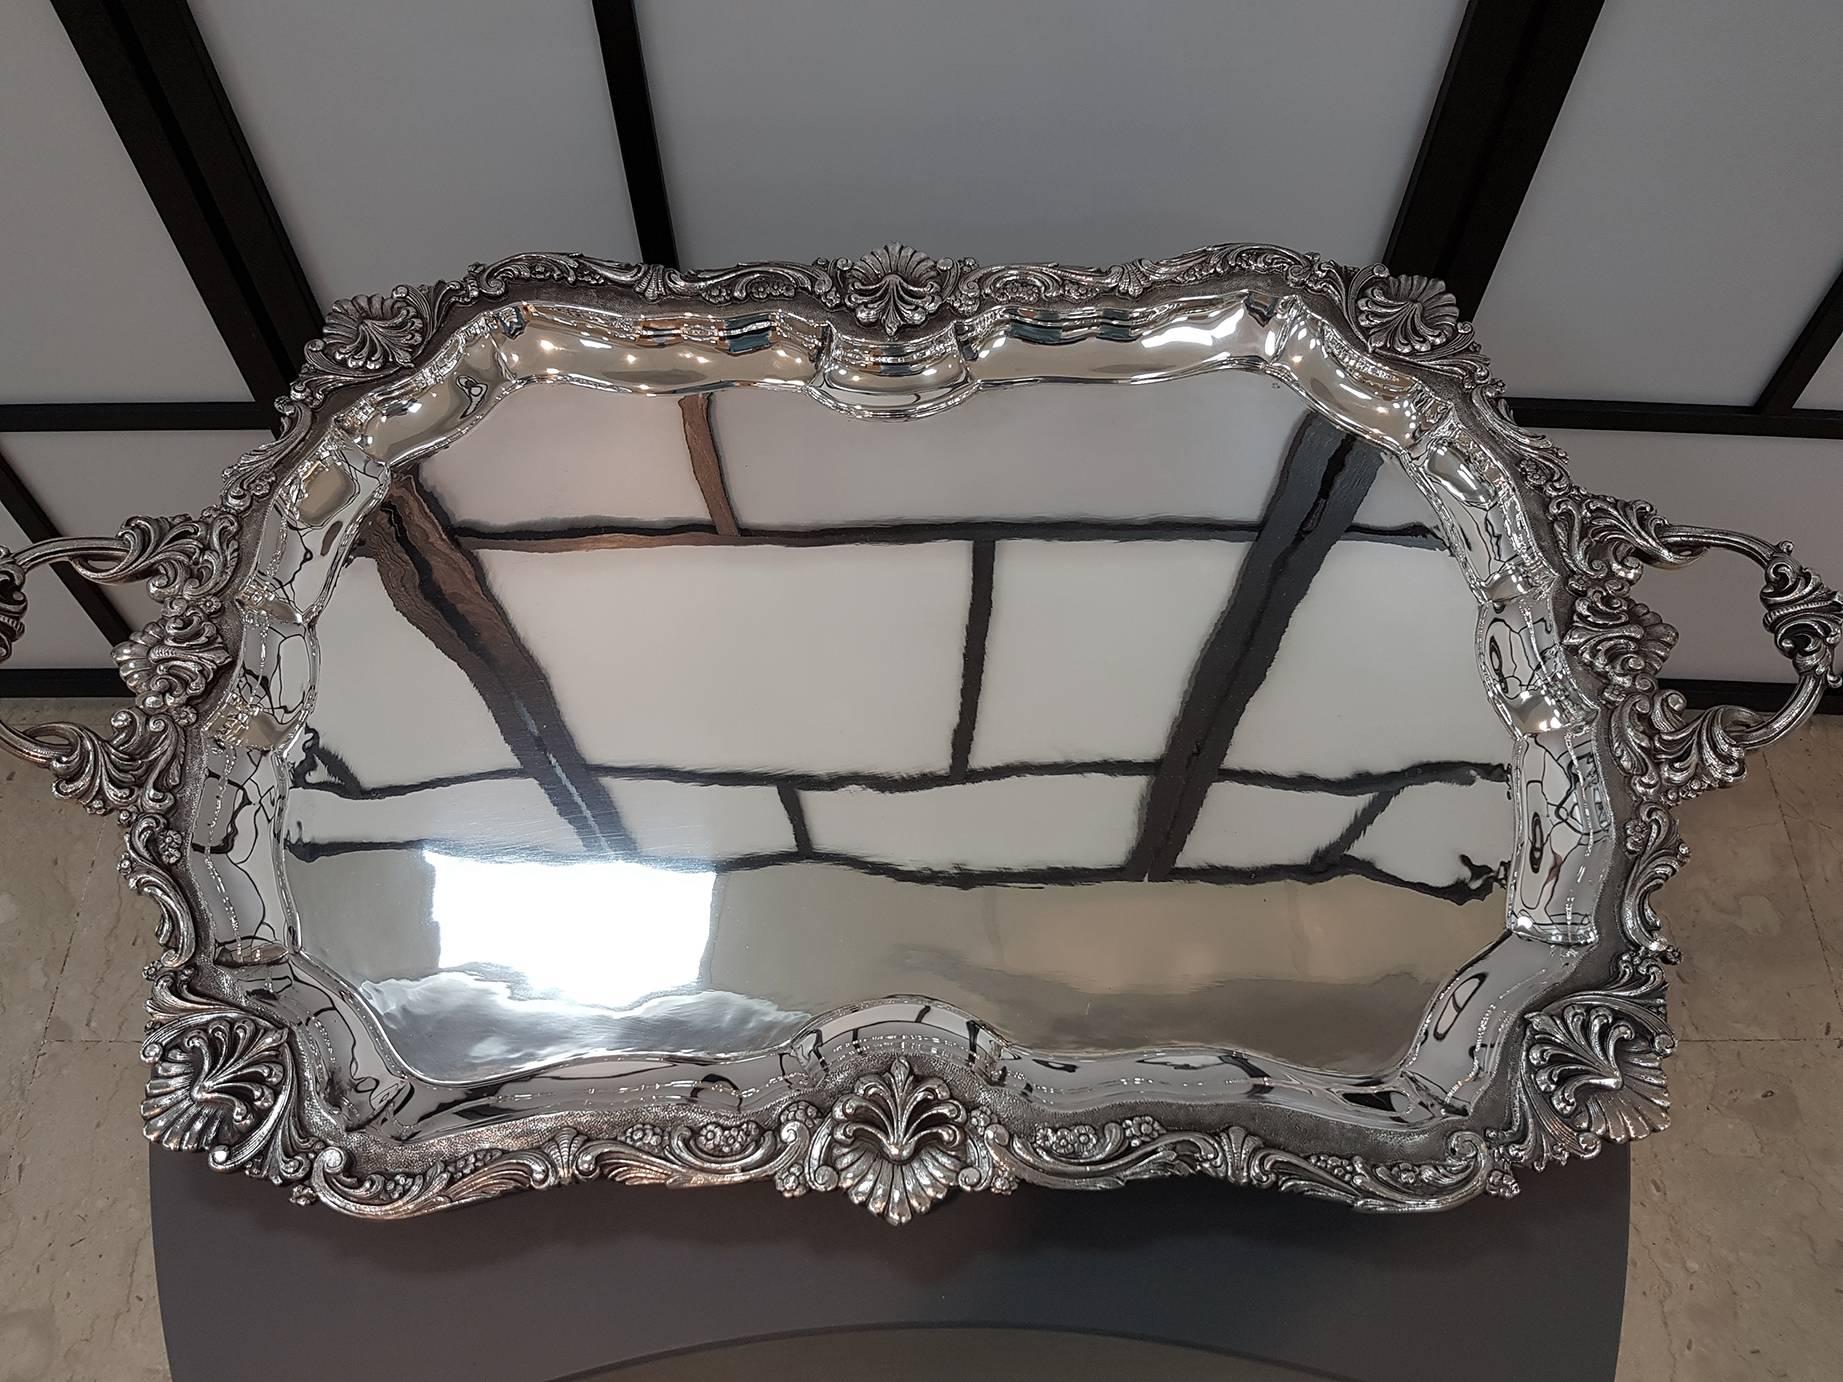 Late 20th Century 20th Century Italian Sterling Silver Tray Baroque revival. Square smooth stand 